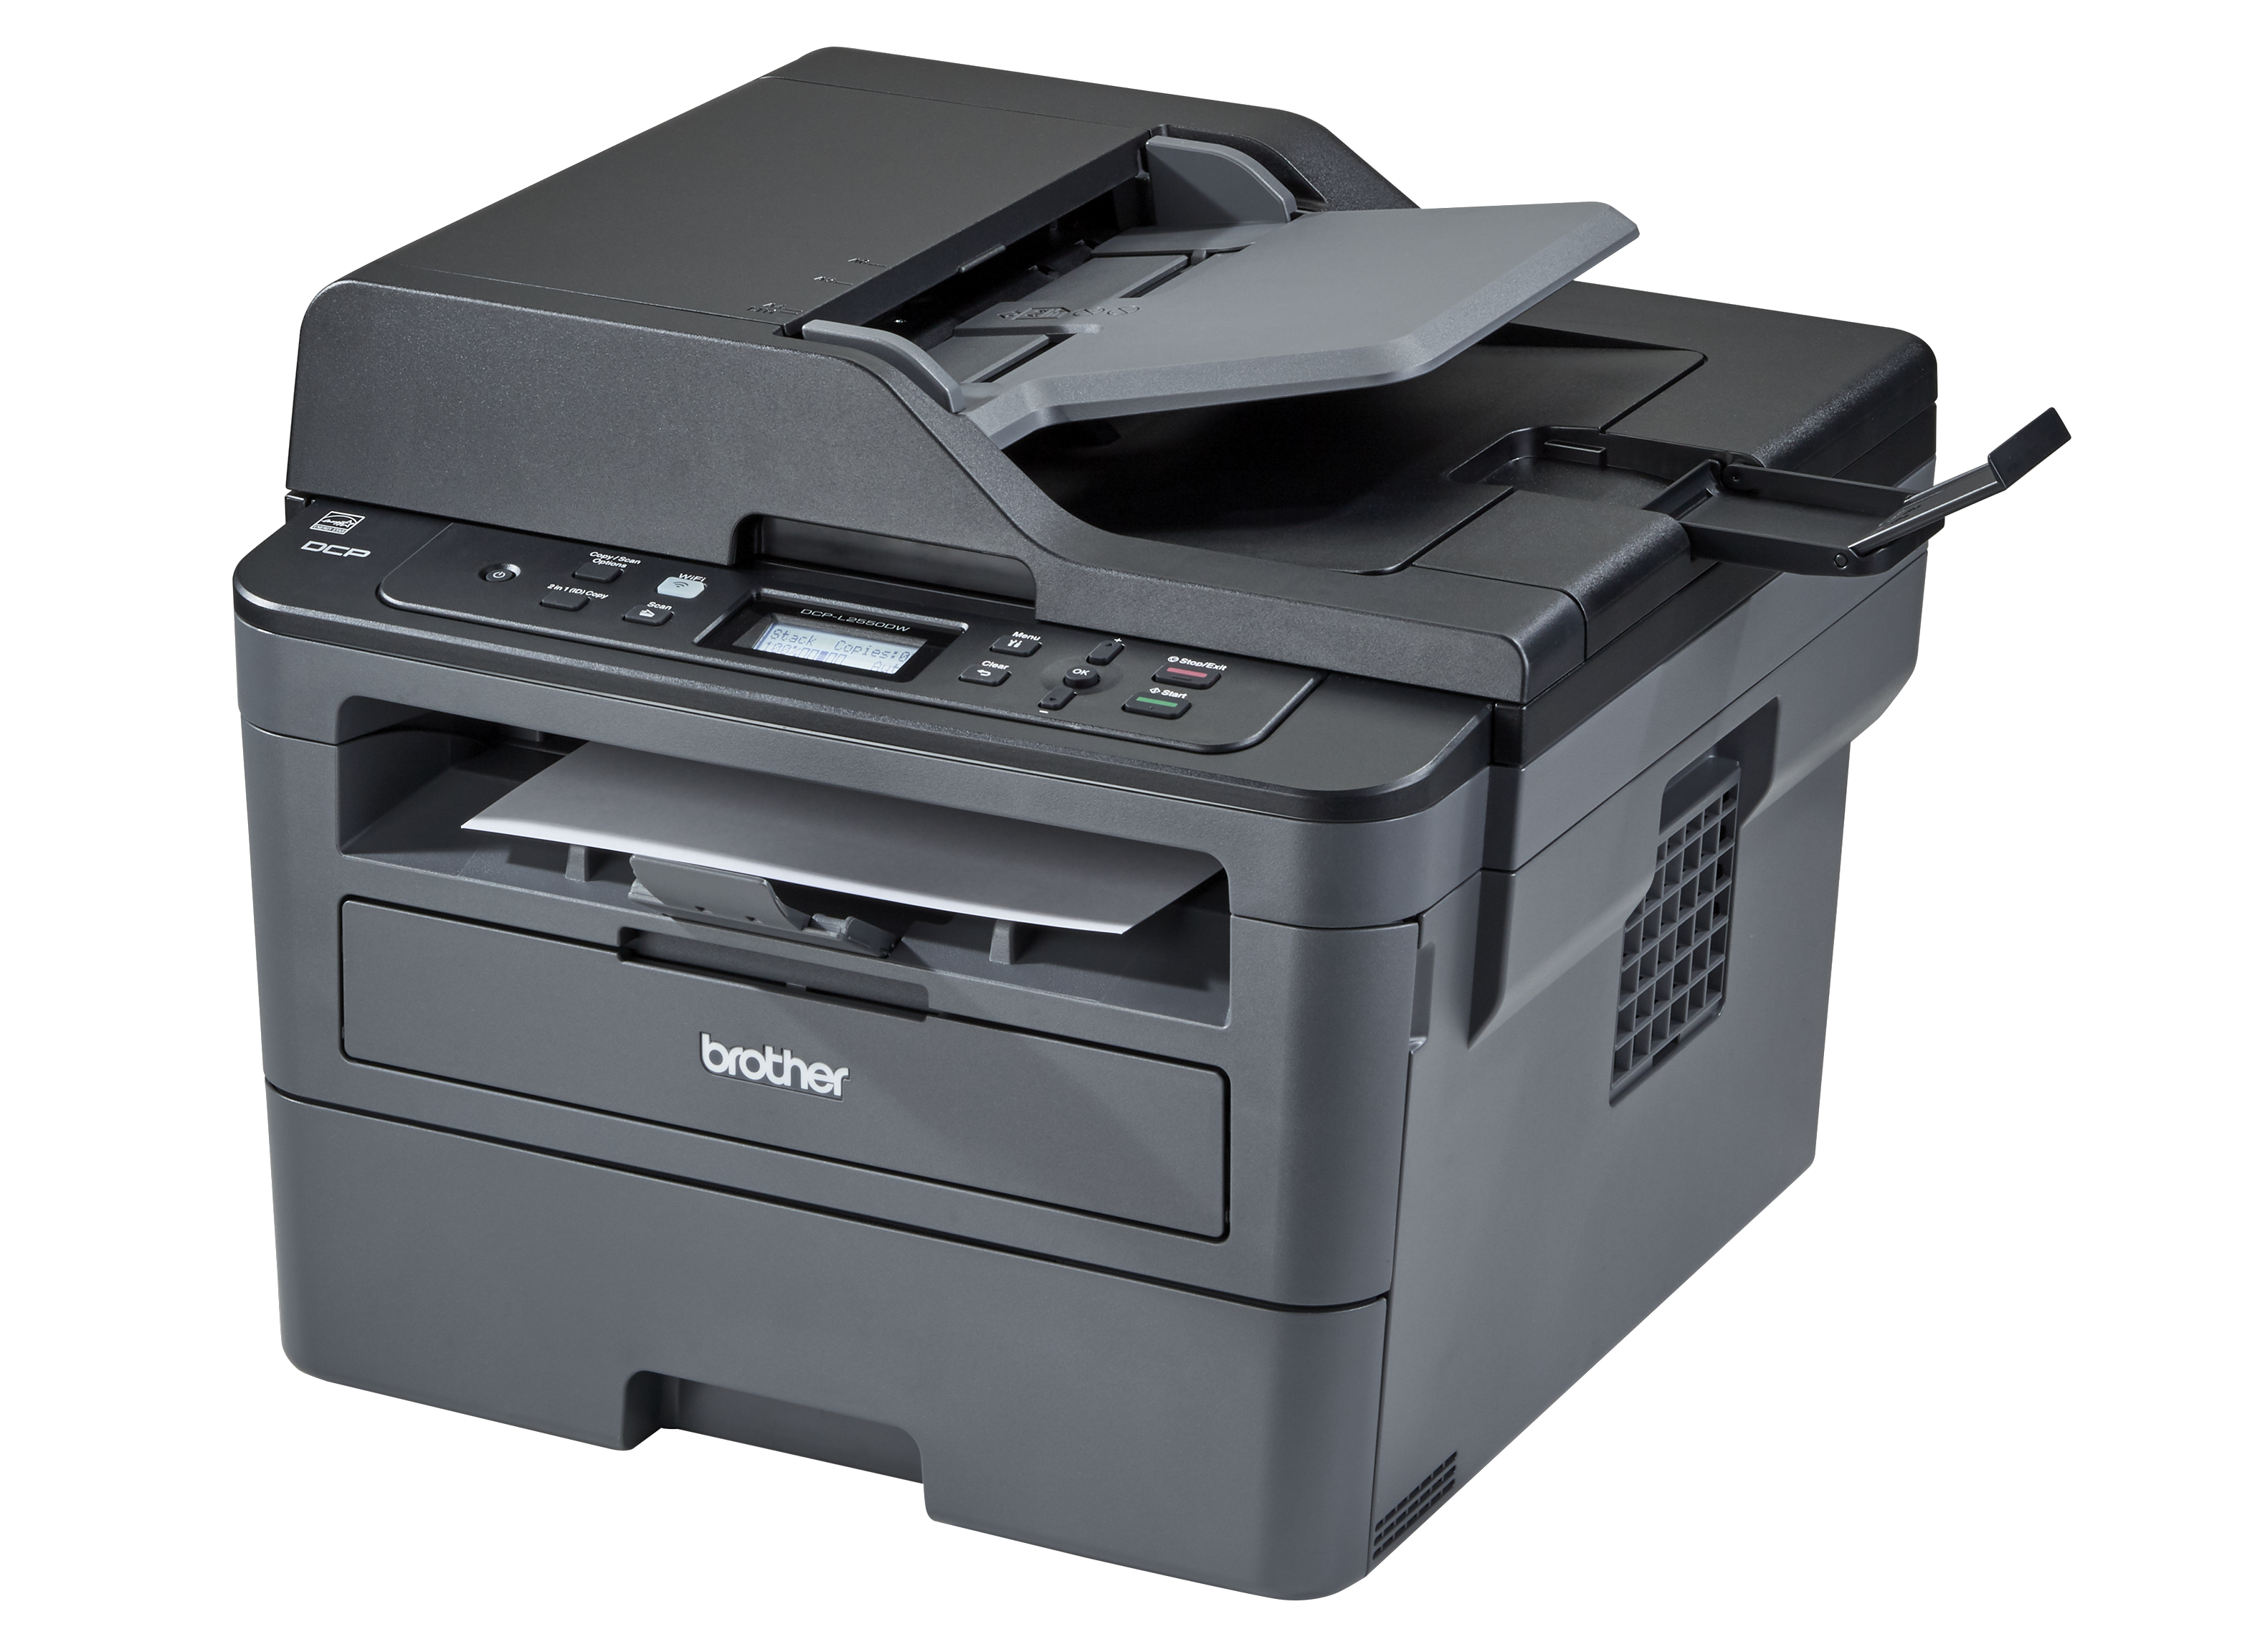 Rød dato Fabel margen Brother DCP-L2550DW Printer Review - Consumer Reports